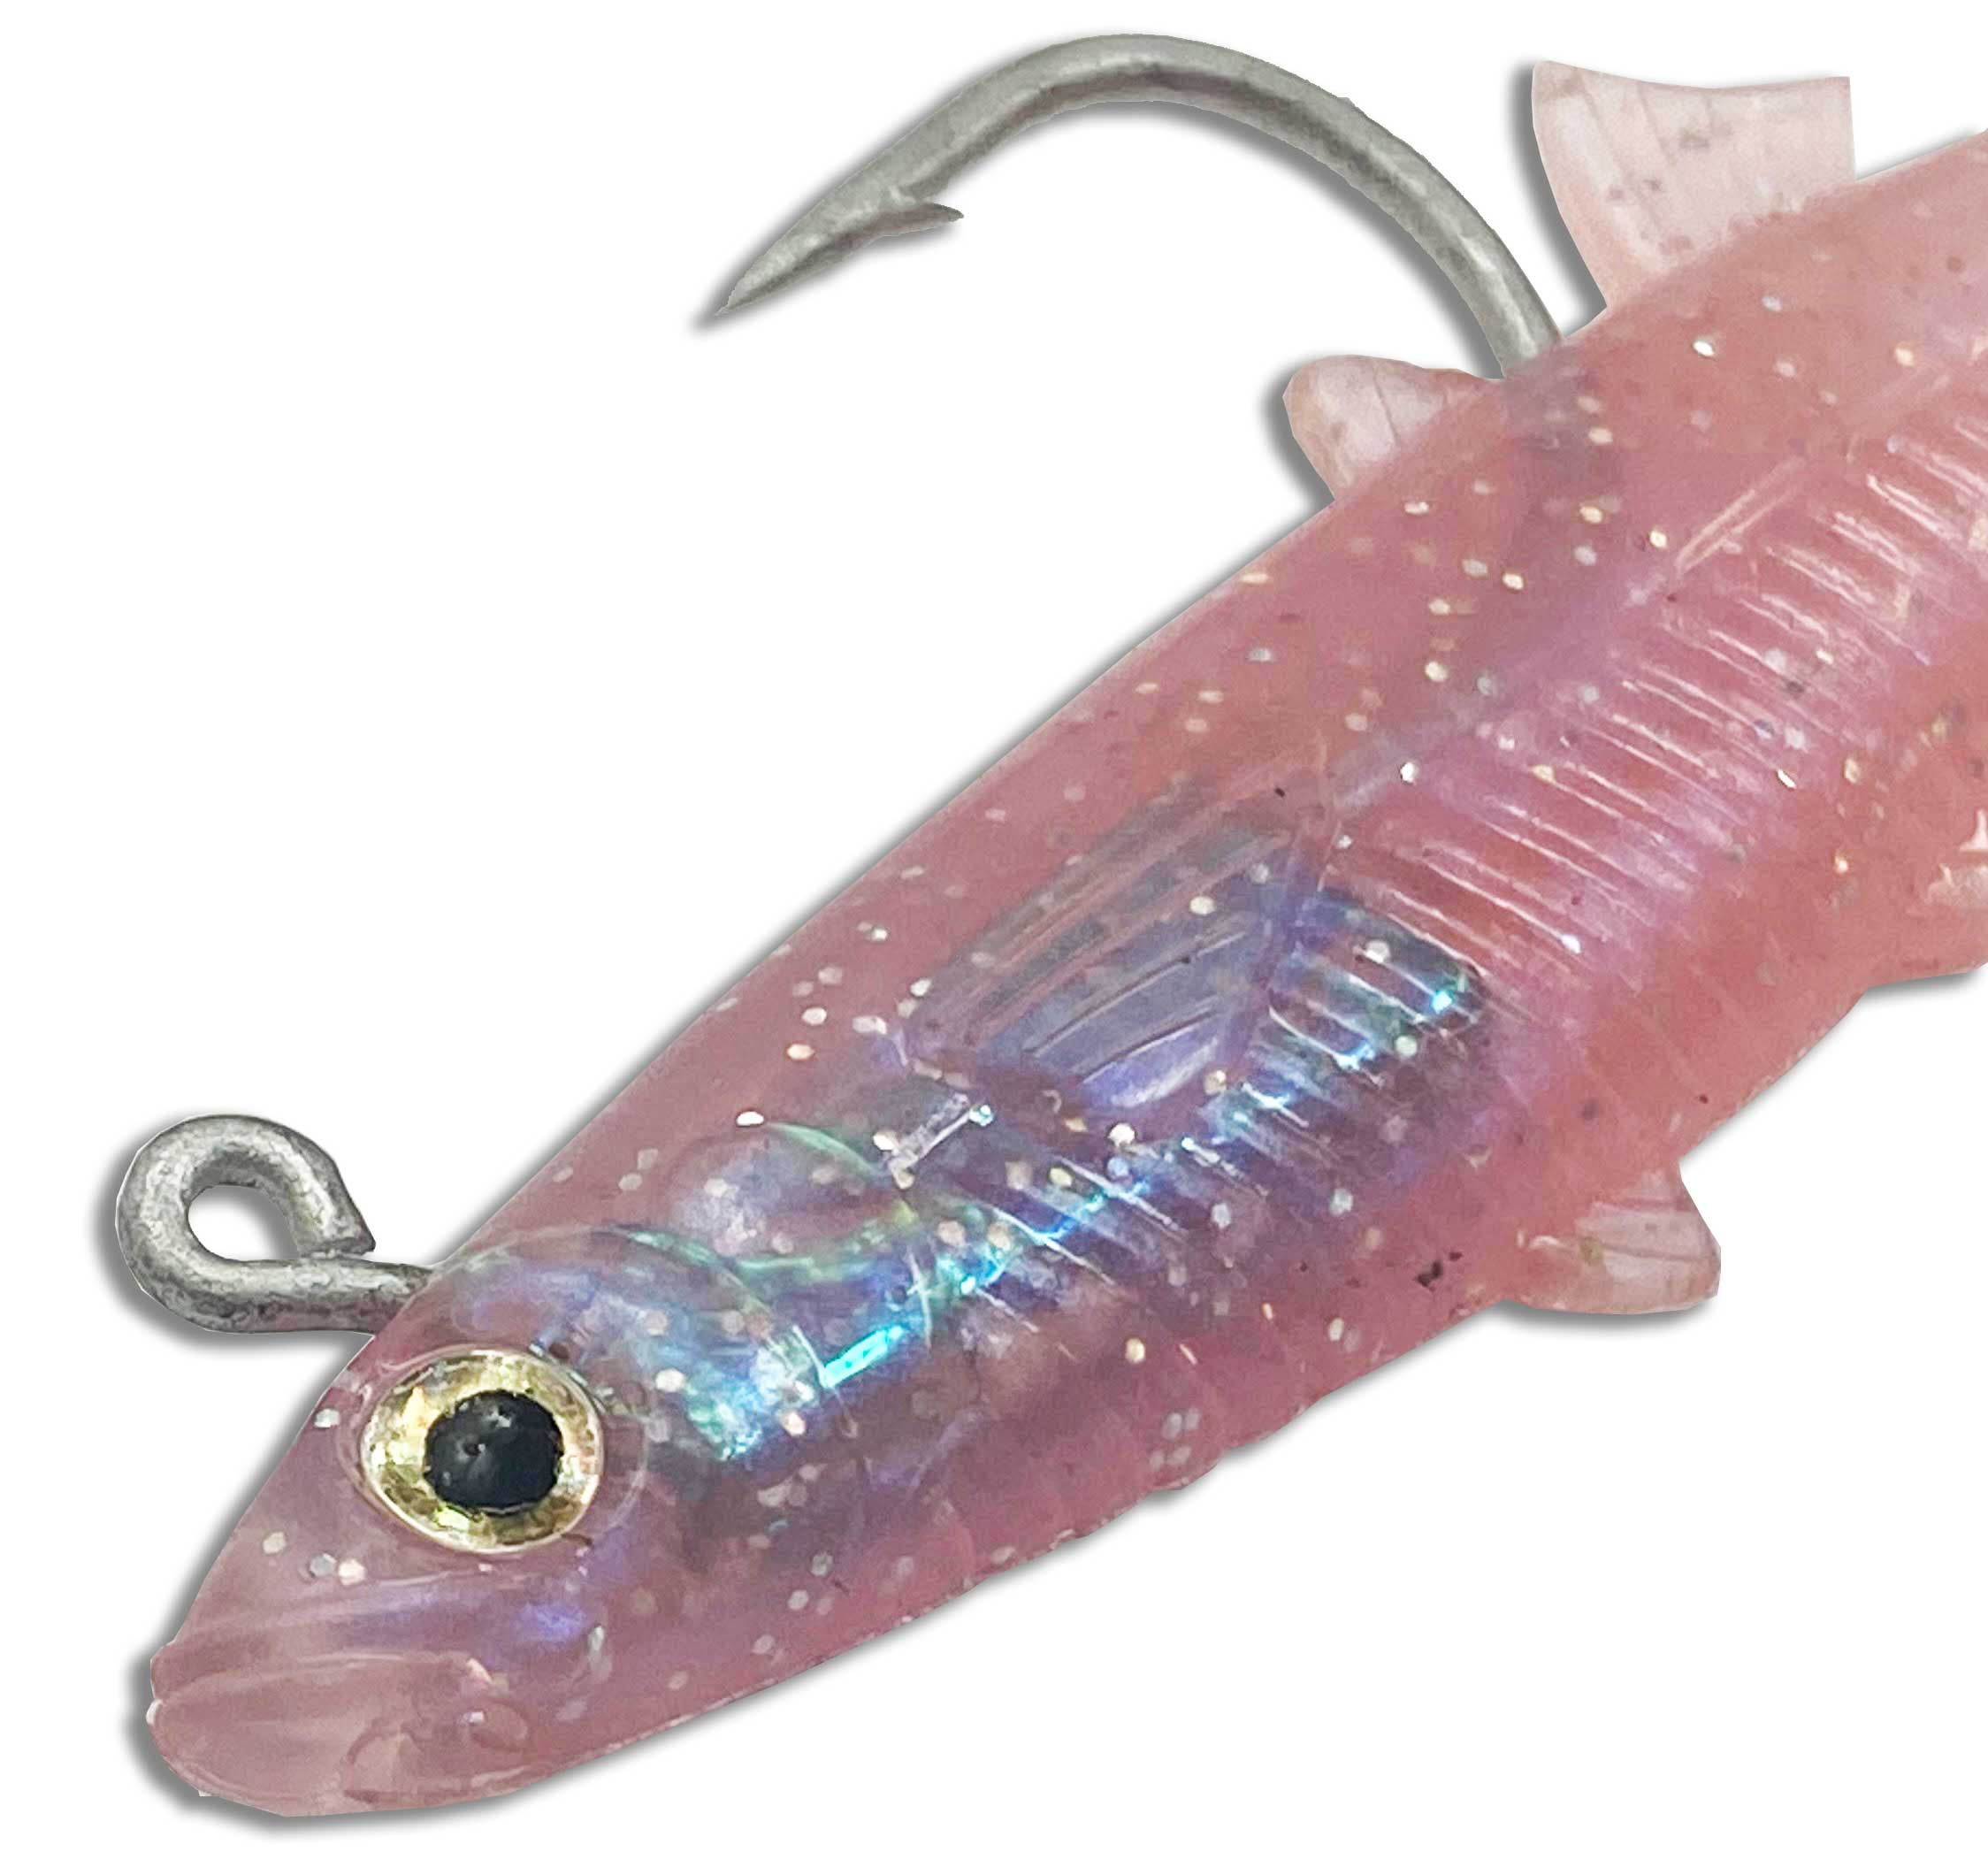 Almost Alive 3.25" Soft Rigged Glass Minnow 5 Pack Purple - Click Image to Close